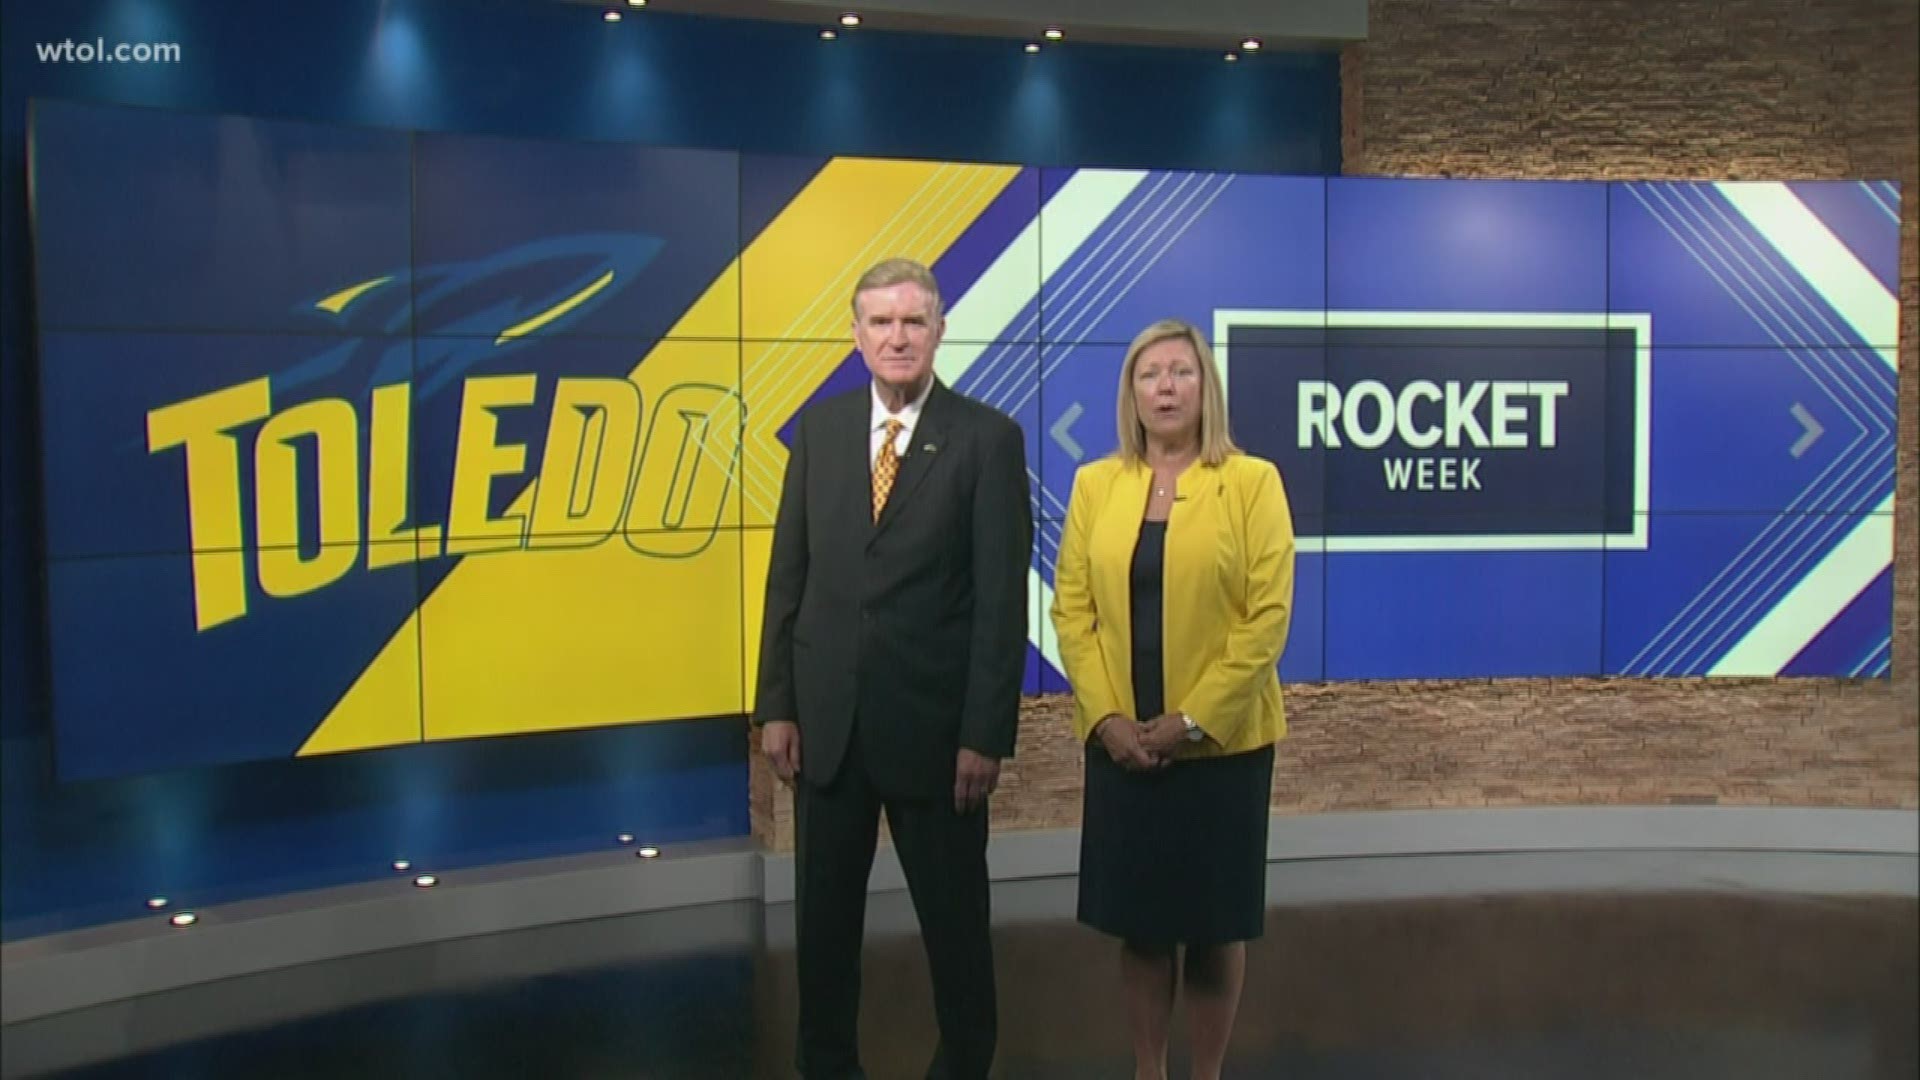 UT and the city of Toledo partner for Rocket Week once again leading up to the first home football game. It's a citywide celebration to show your Rocket Pride - join in by flying your Rocket flag and wear your midnight blue and gold for Tuesday's campus pep rally at 12:30 at Centennial Mall and at Thursday's rally at the food trucks at Levis Square.